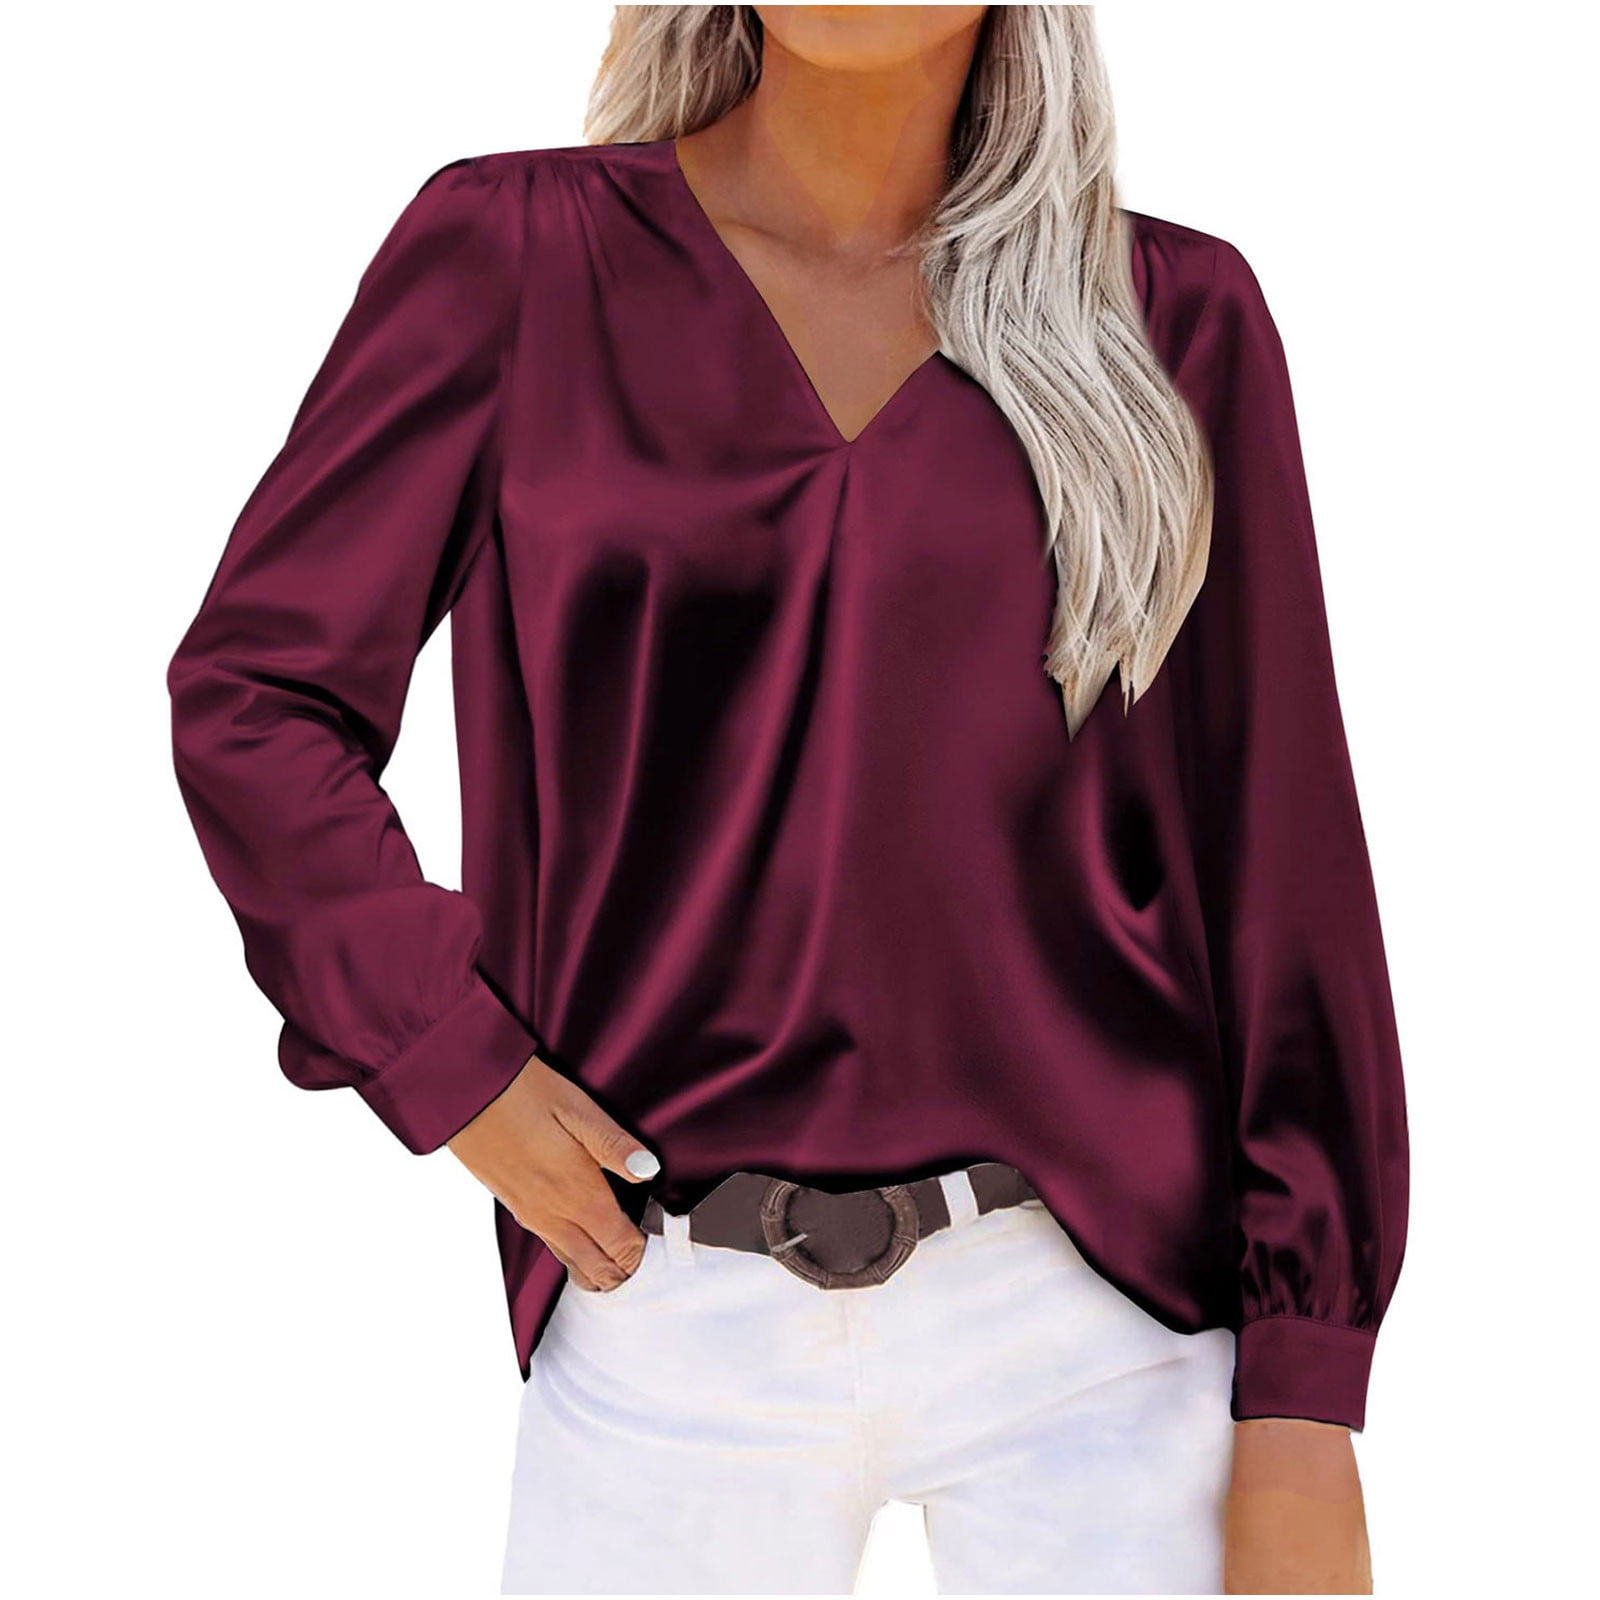 Going Out Tops For Women, Ladies Dressy Tops